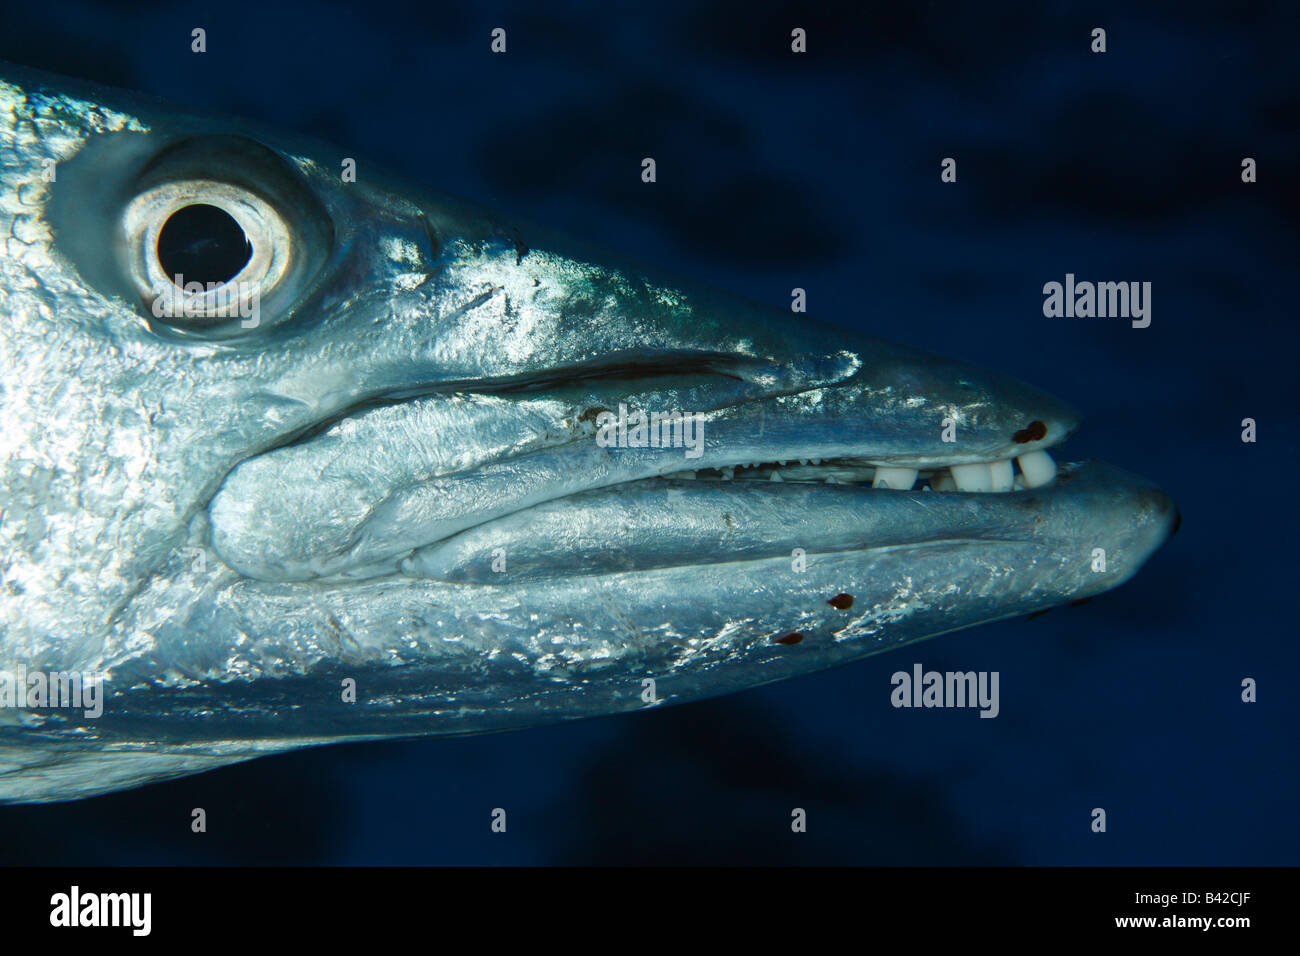 A close-up head shot of a great barracuda free-swimming in the open water. Stock Photo